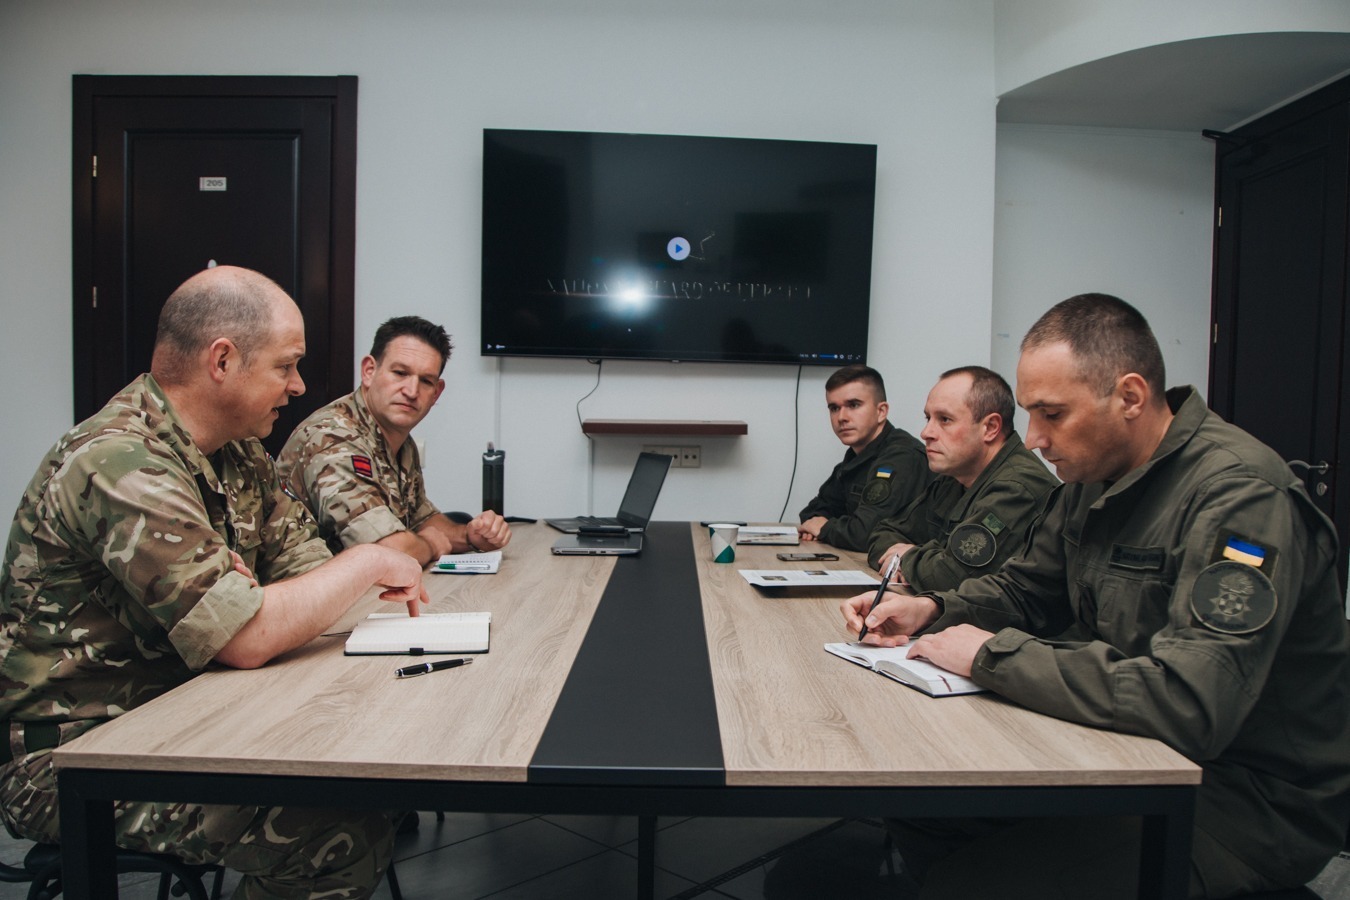 British commanders (left) meet with senior officials from Ukraine’s National Guard in Kyiv, September 2021. (Photo: NGU)